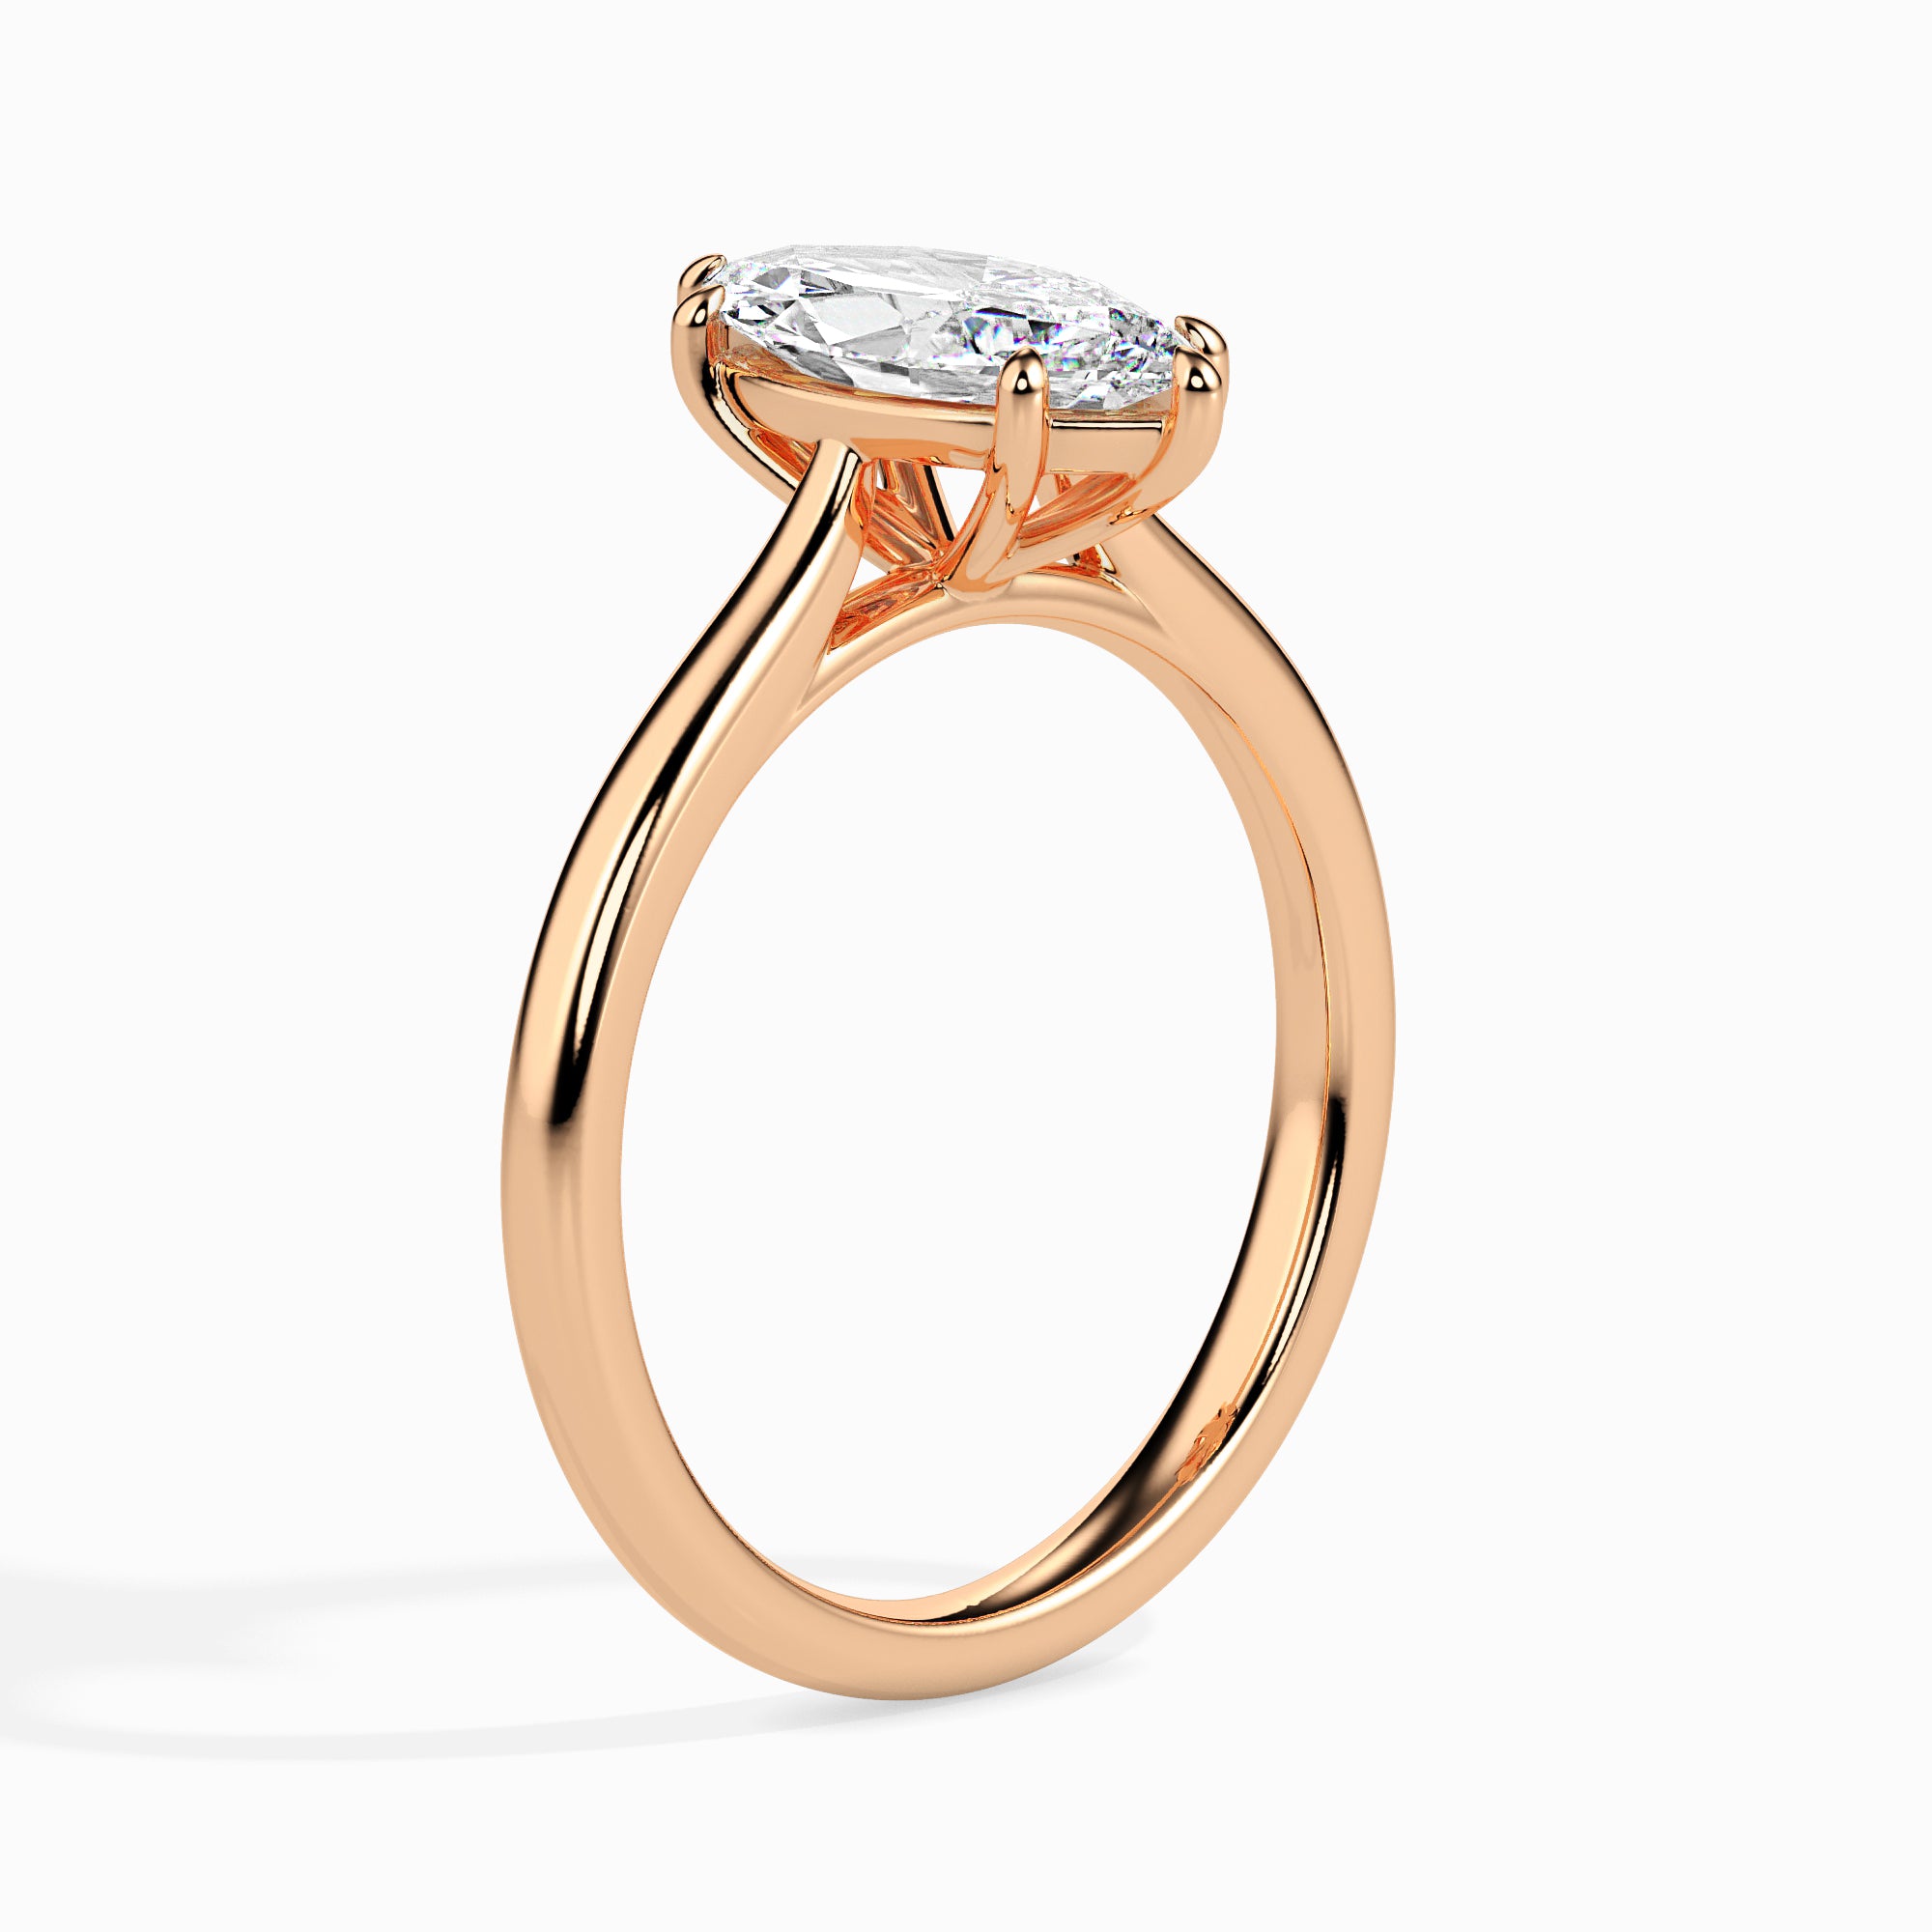 30-Pointer Marquise Cut Solitaire Diamond 18K Rose Gold Ring JL AU 19009R